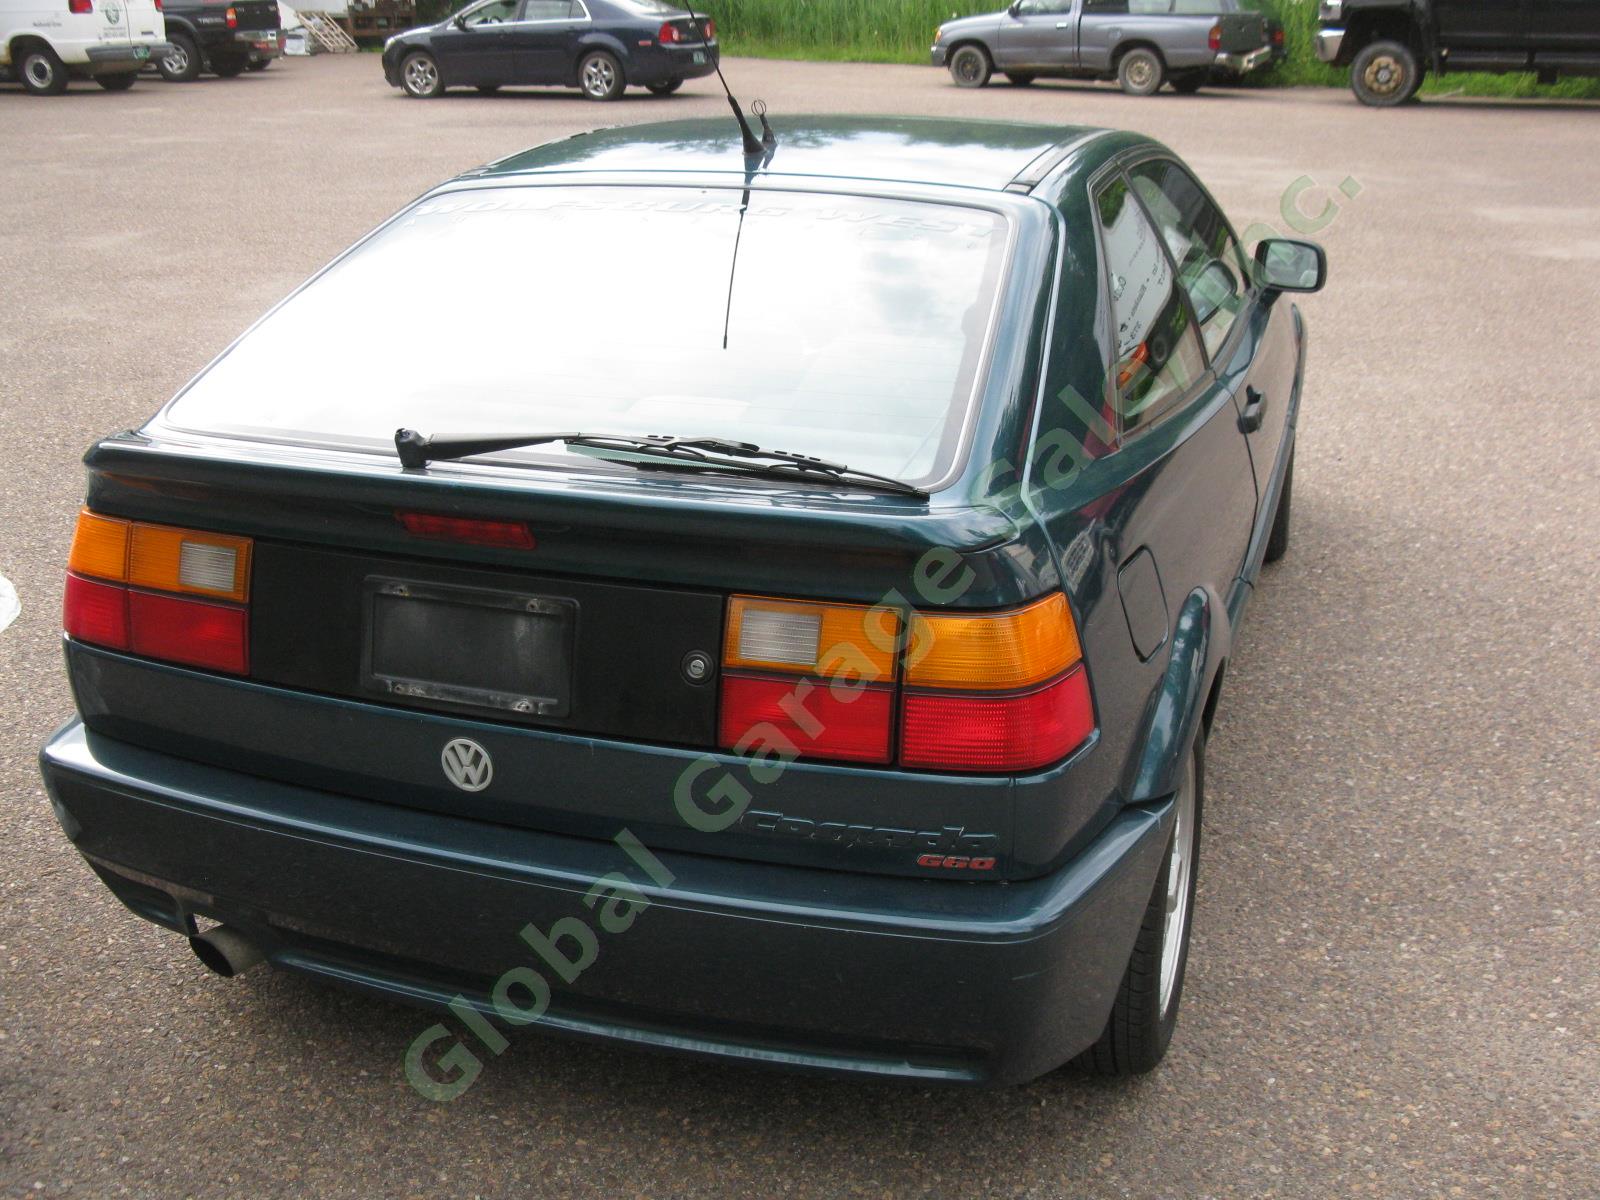 1992 VW Volkswagen Corrado G60 Supercharged 158hp 1.8L 5-Spd One Owner LOW PRICE 4